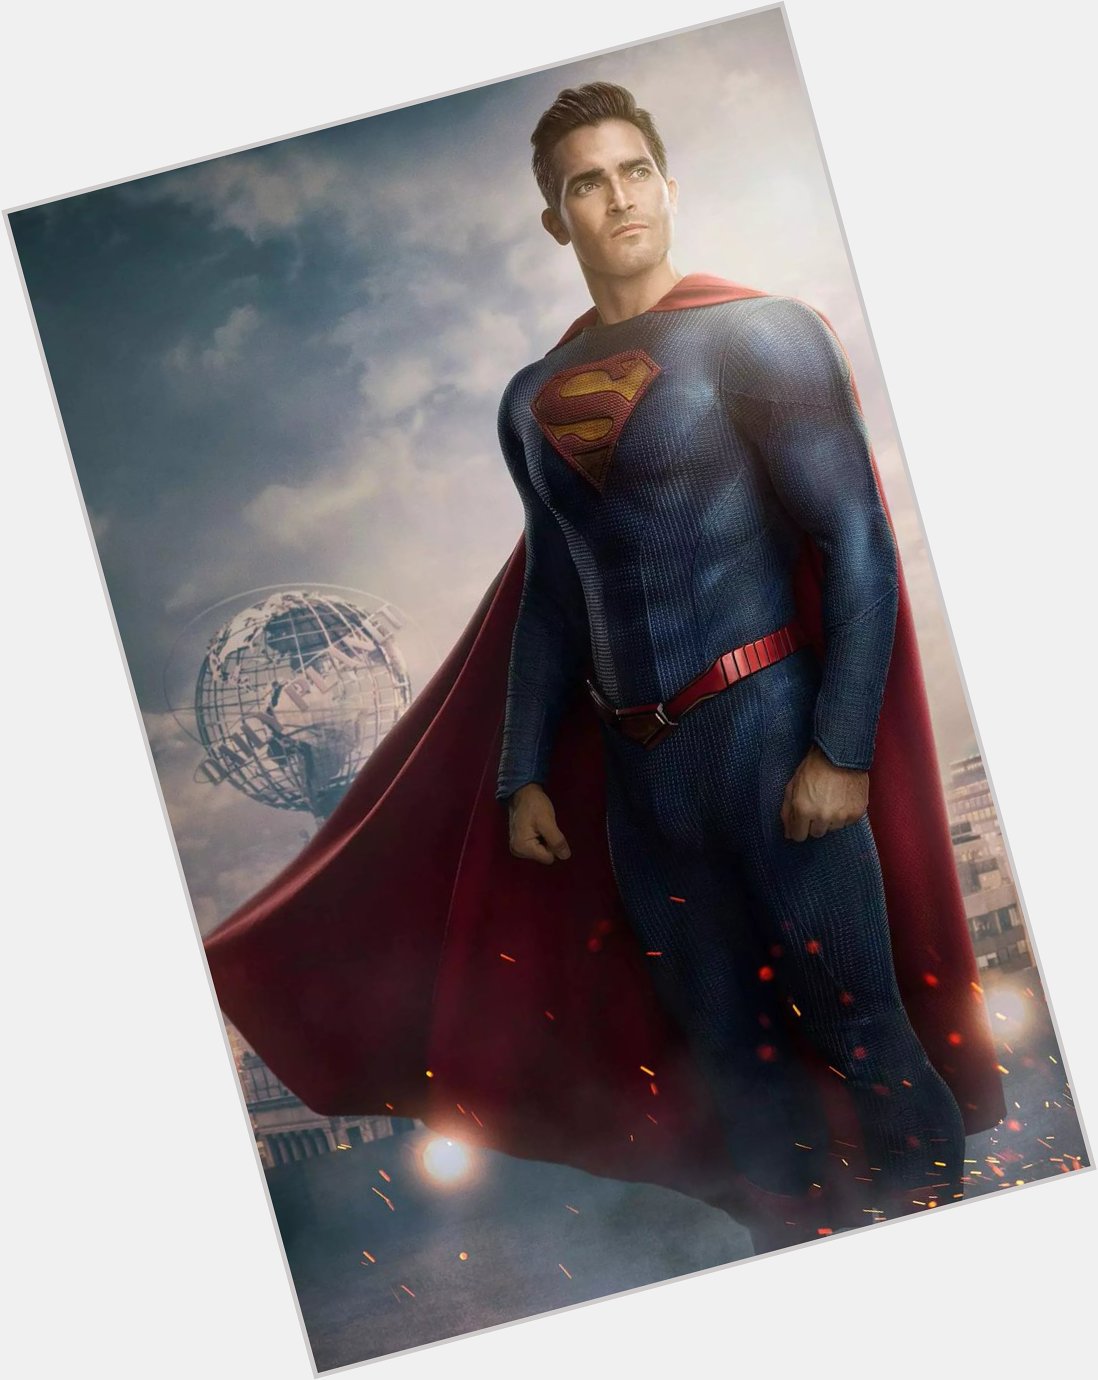 Happy birthday to my favorite clark kent
Tyler Hoechlin 
May you play the man of steel for years to come 